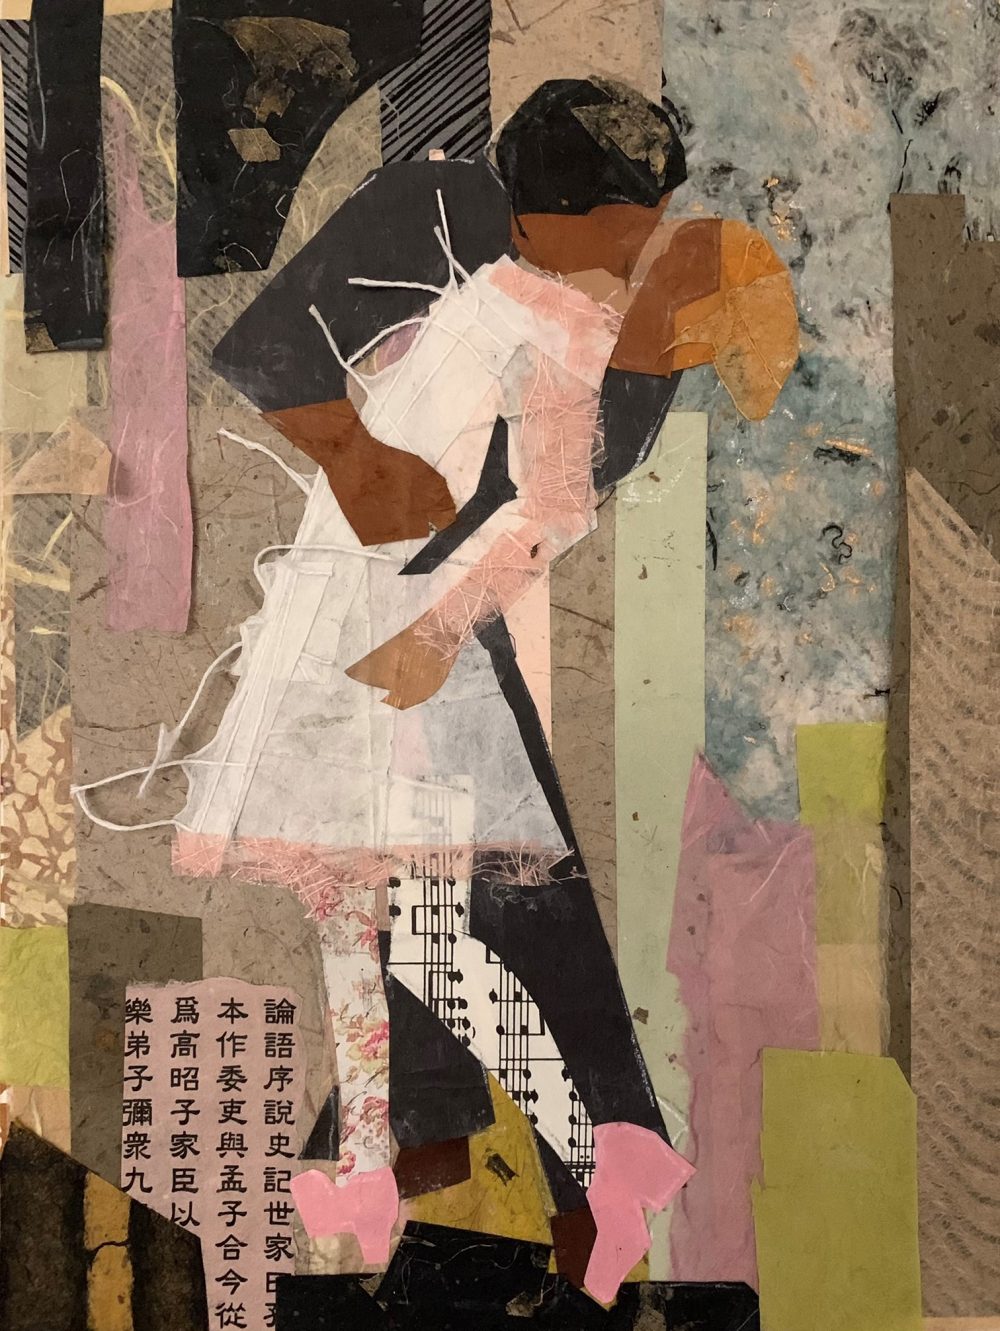 This collage shows a man in dark clothes kissing a woman in a white dress.